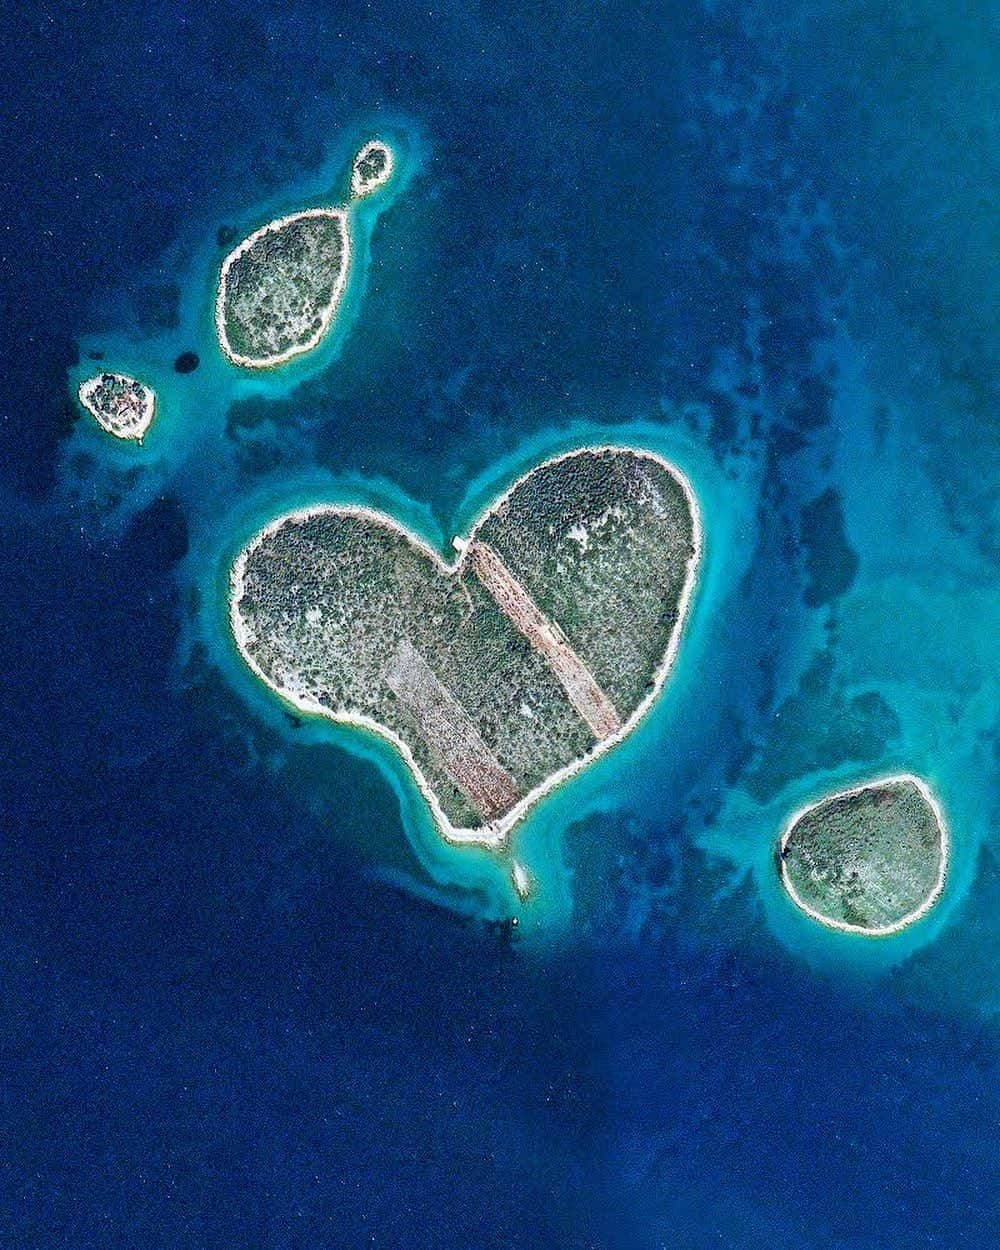 Daily Overviewのインスタグラム：「Happy Valentine’s Day! Check out this Overview of Galešnjak Island, Croatia, we created using the @airbus_space OneAtlas platform. Located in the Pašman Canal on the Adriatic Sea, this heart-shaped island is known around the world and is often called "Lover's Island.” There are currently no human habitants on the island, but it is a popular attraction for daily private tours and has facilities for engagements and small weddings. - You can use OneAtlas from @airbus_space to create custom high-resolution prints on our website! Link in bio to check out our Custom Print Creator.」